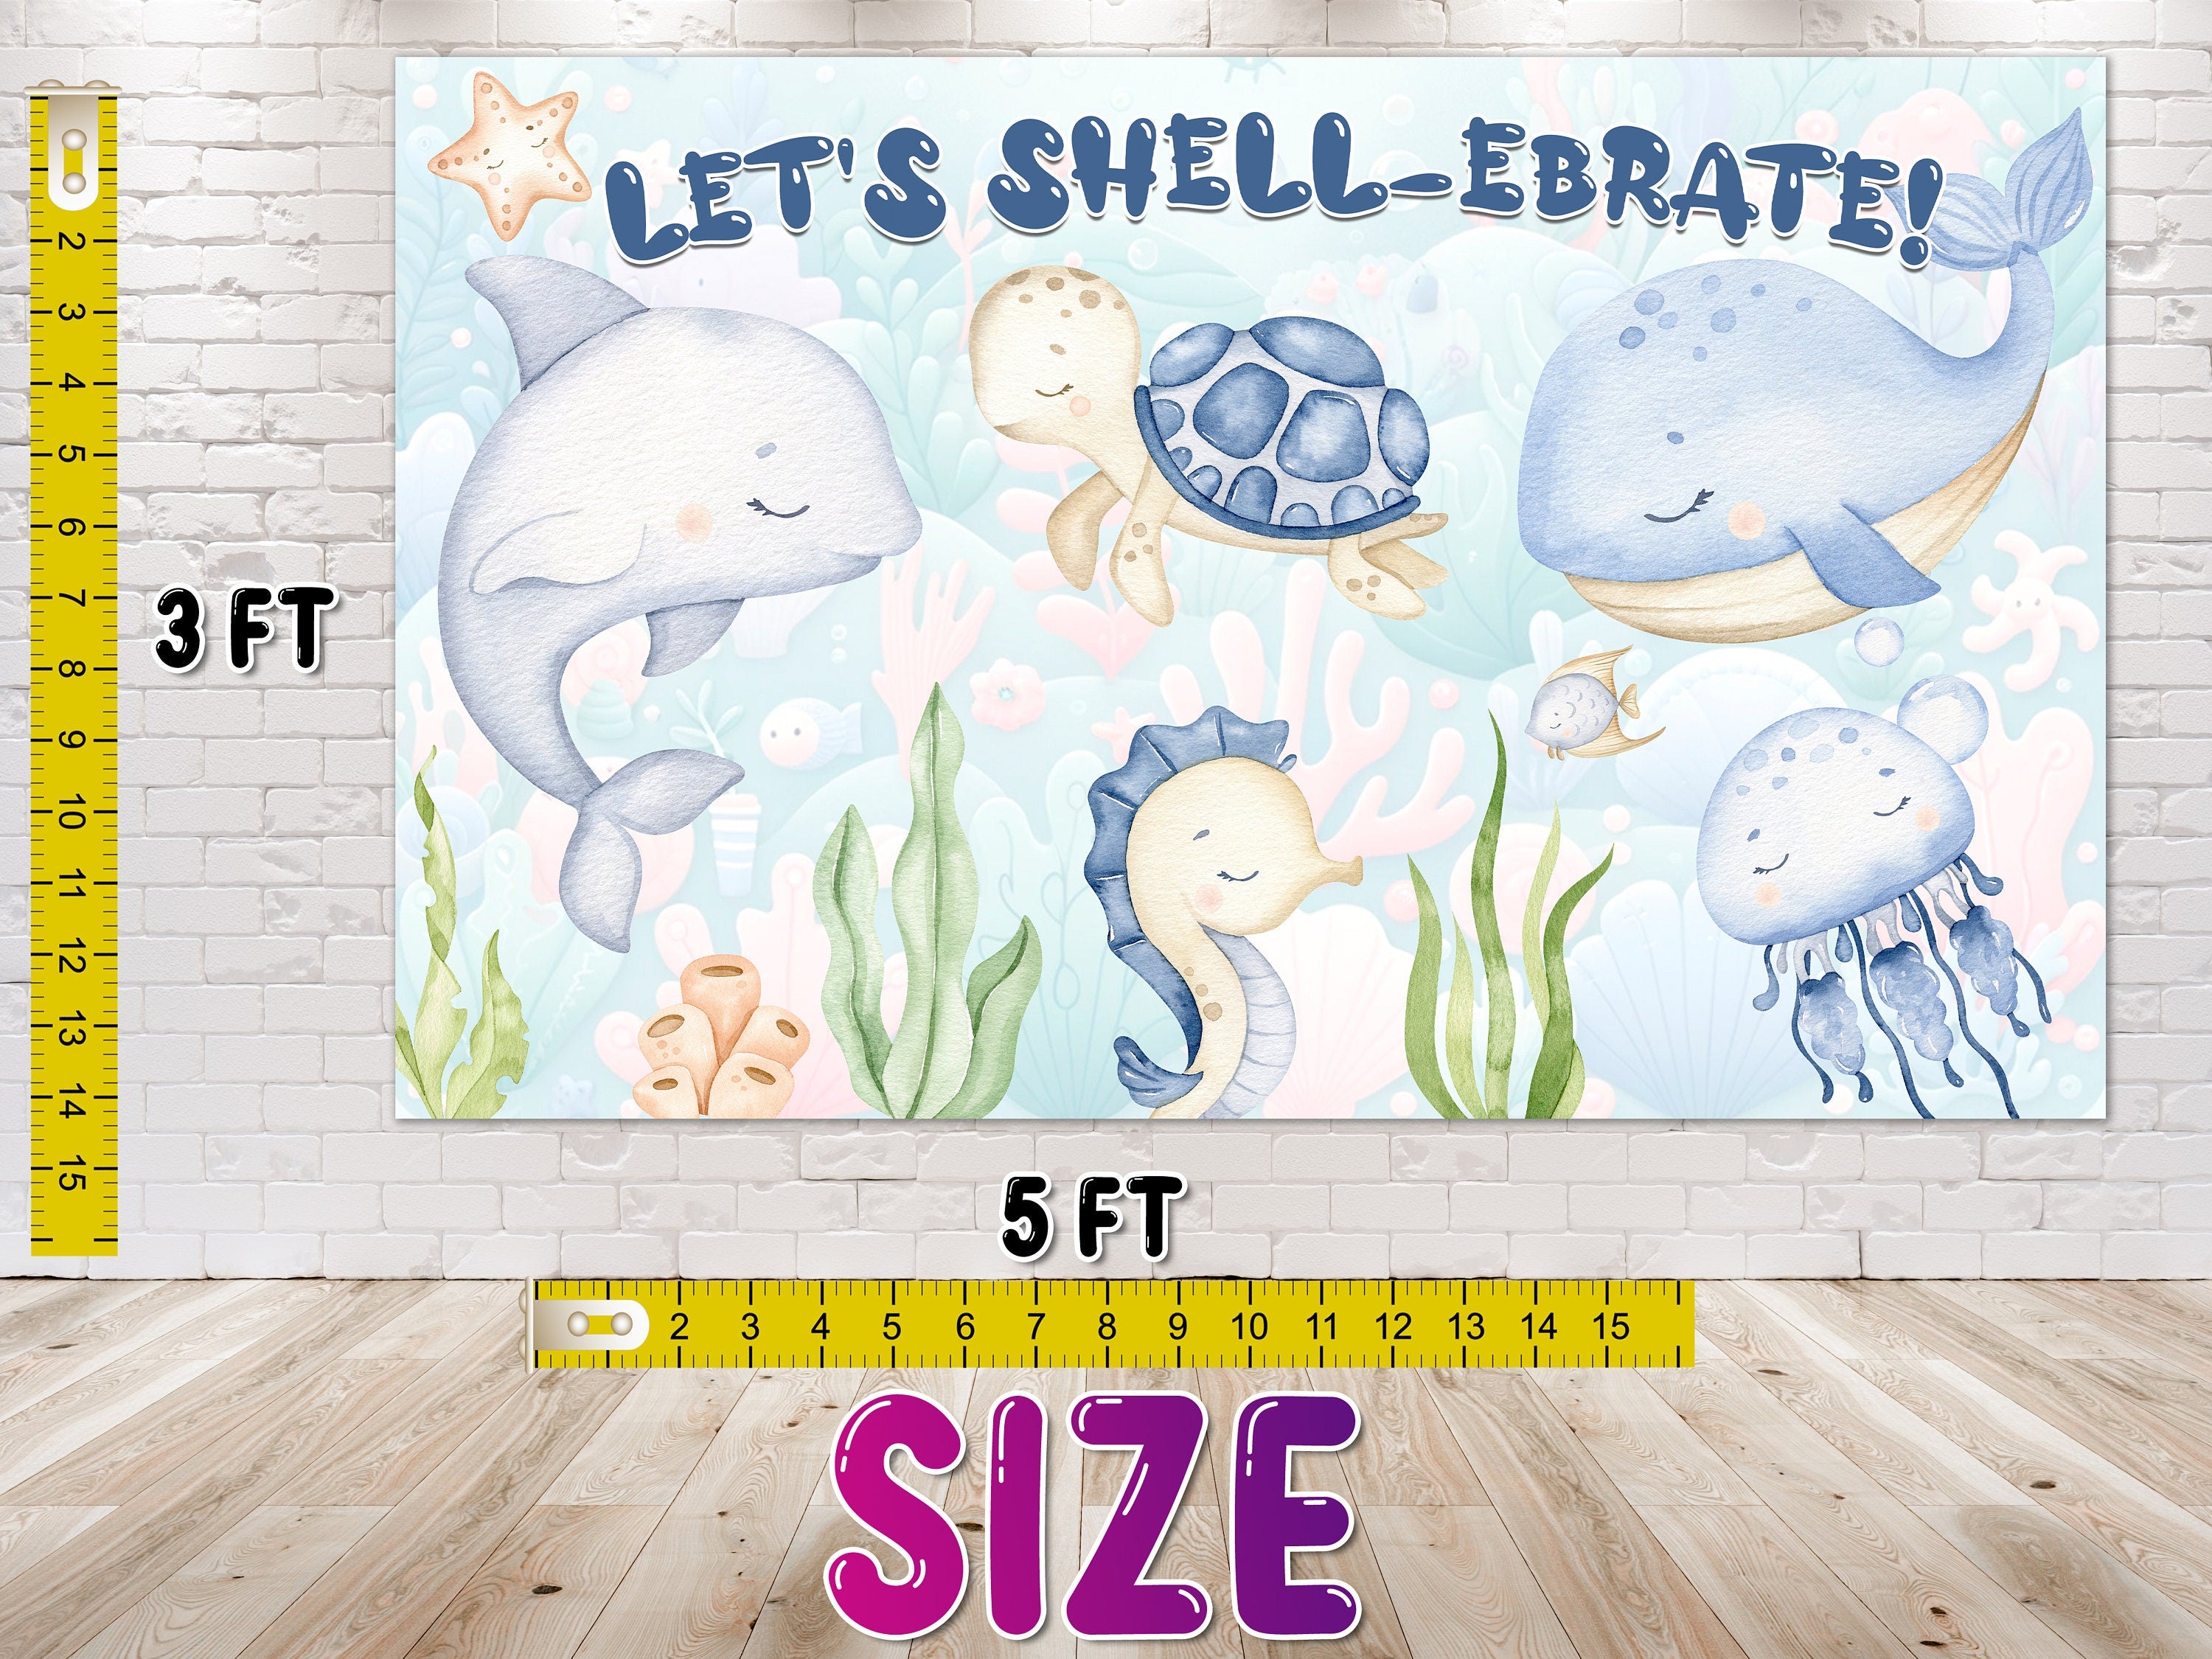 Let's Shell-ebrate! Under The Sea Birthday Backdrop 5x3 FT - Ocean Theme Party